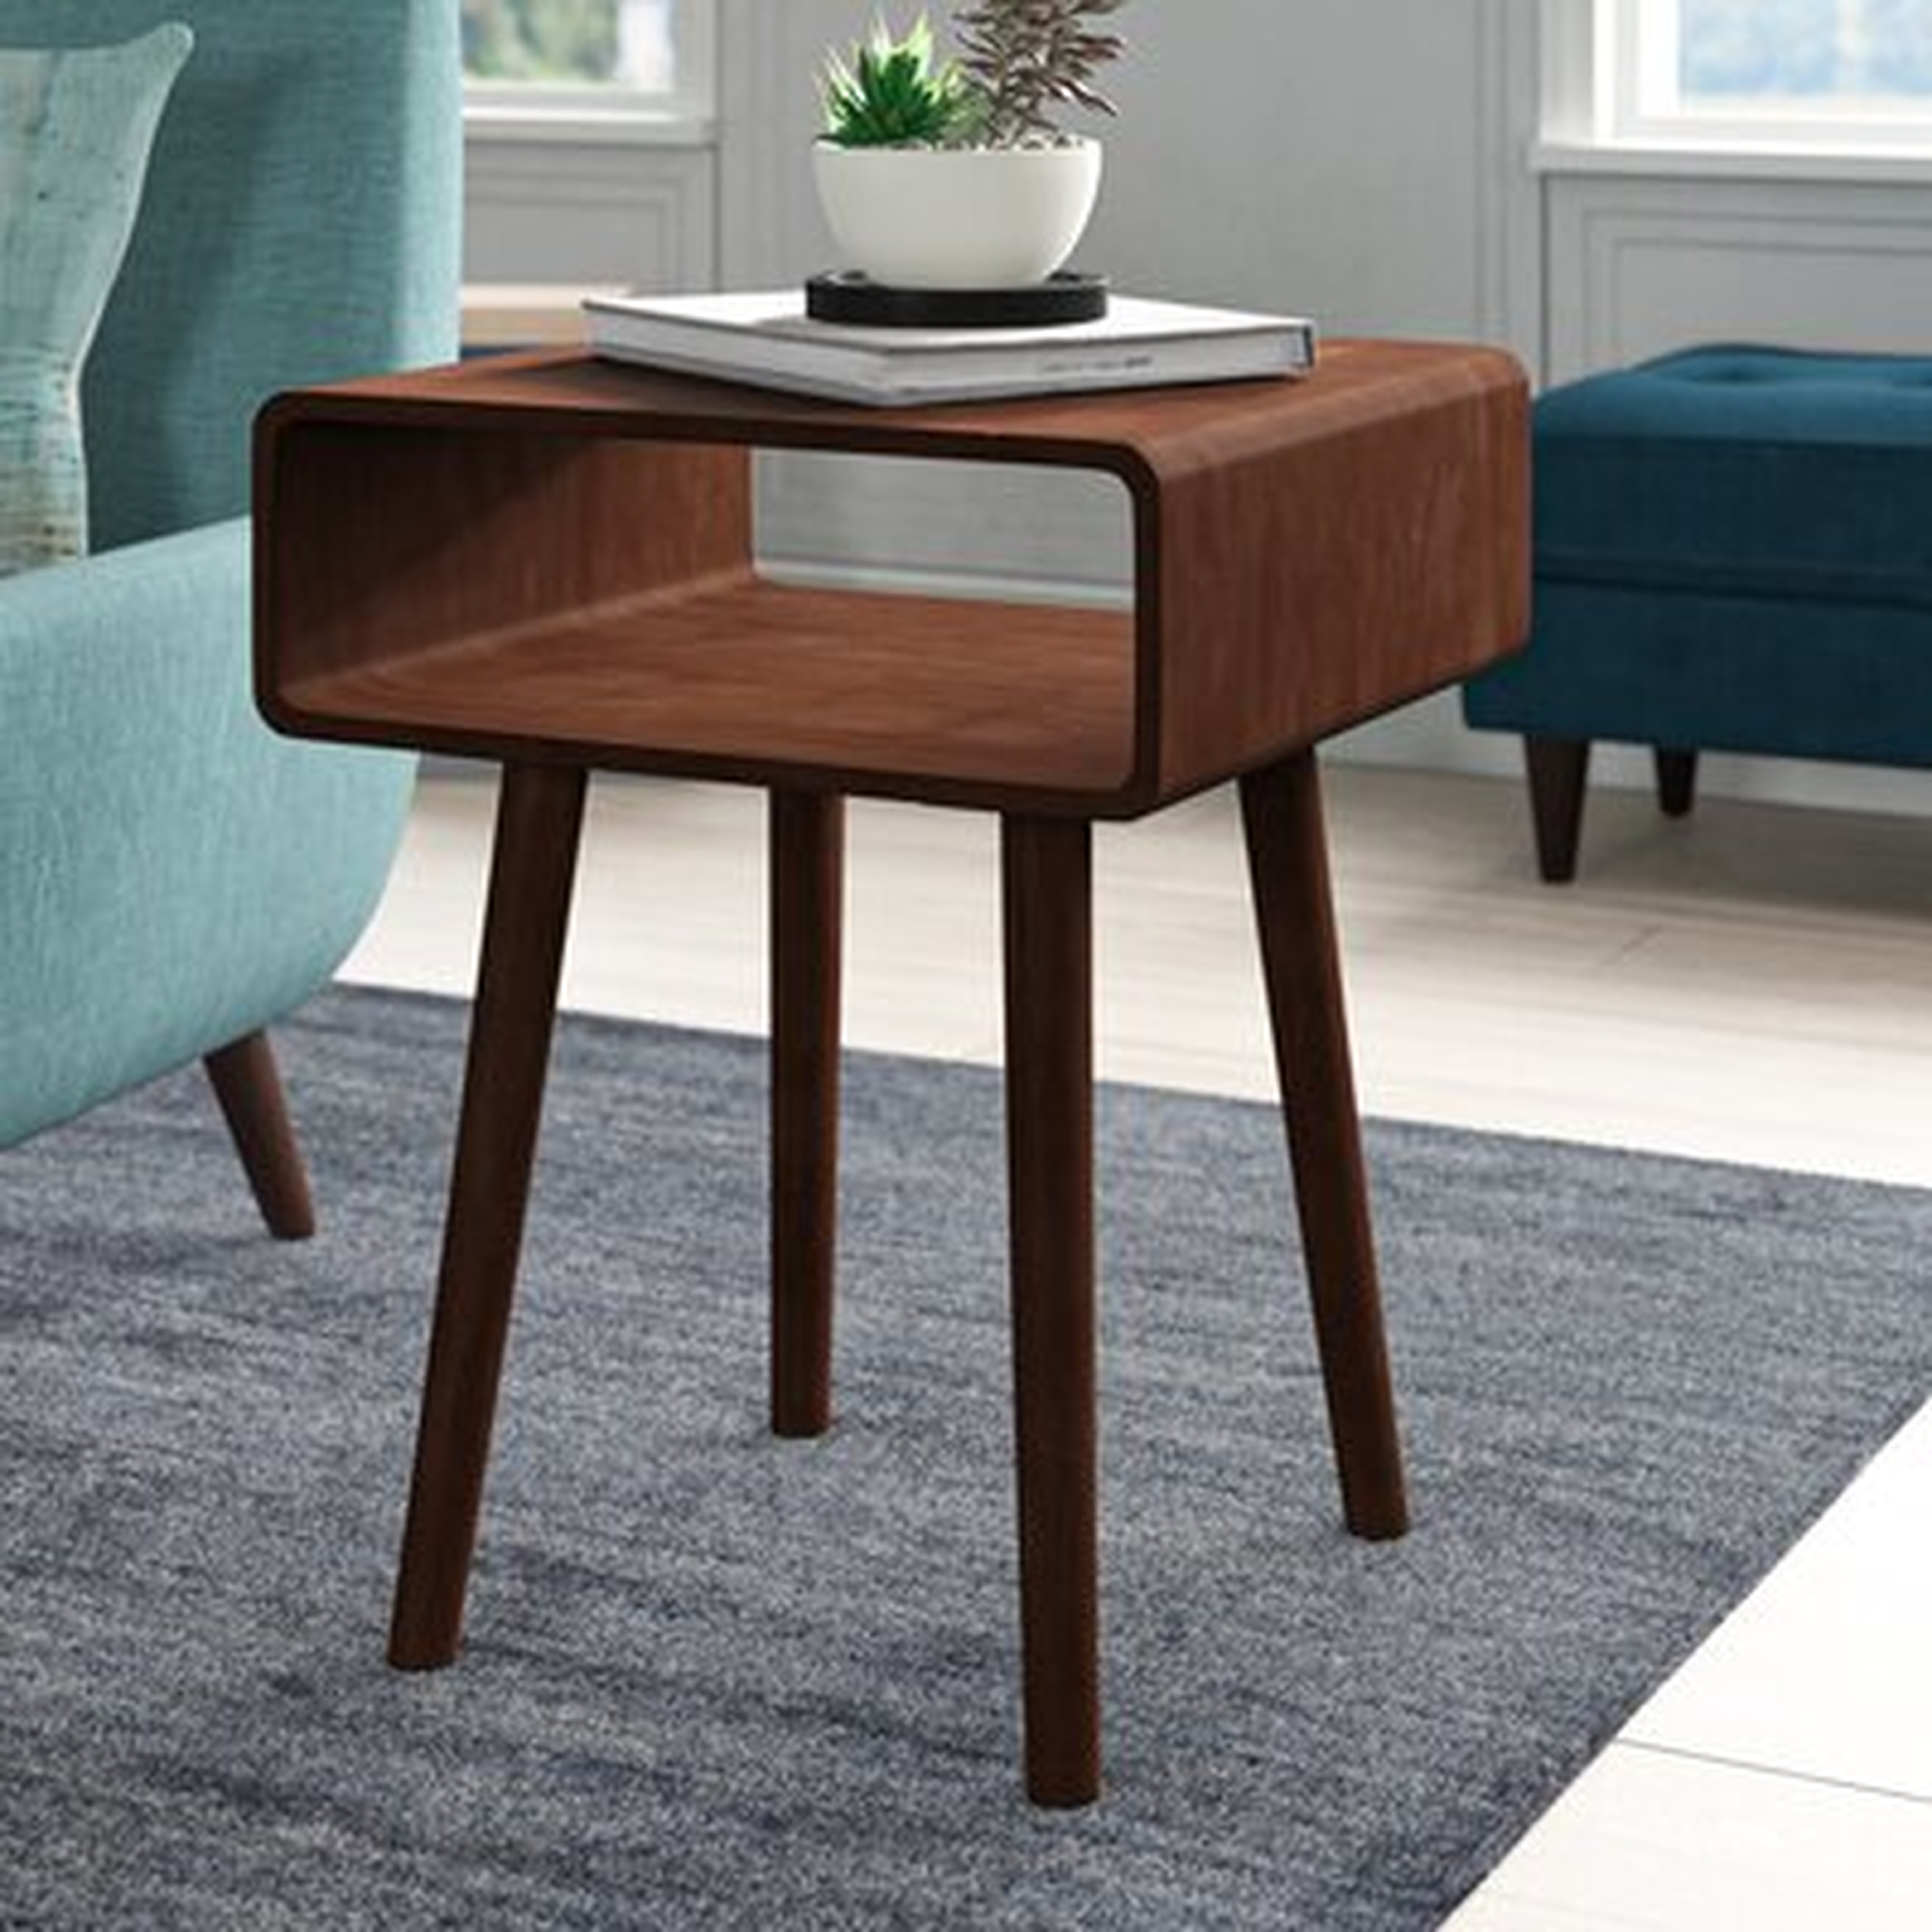 Roger End Table with Storage - Wayfair